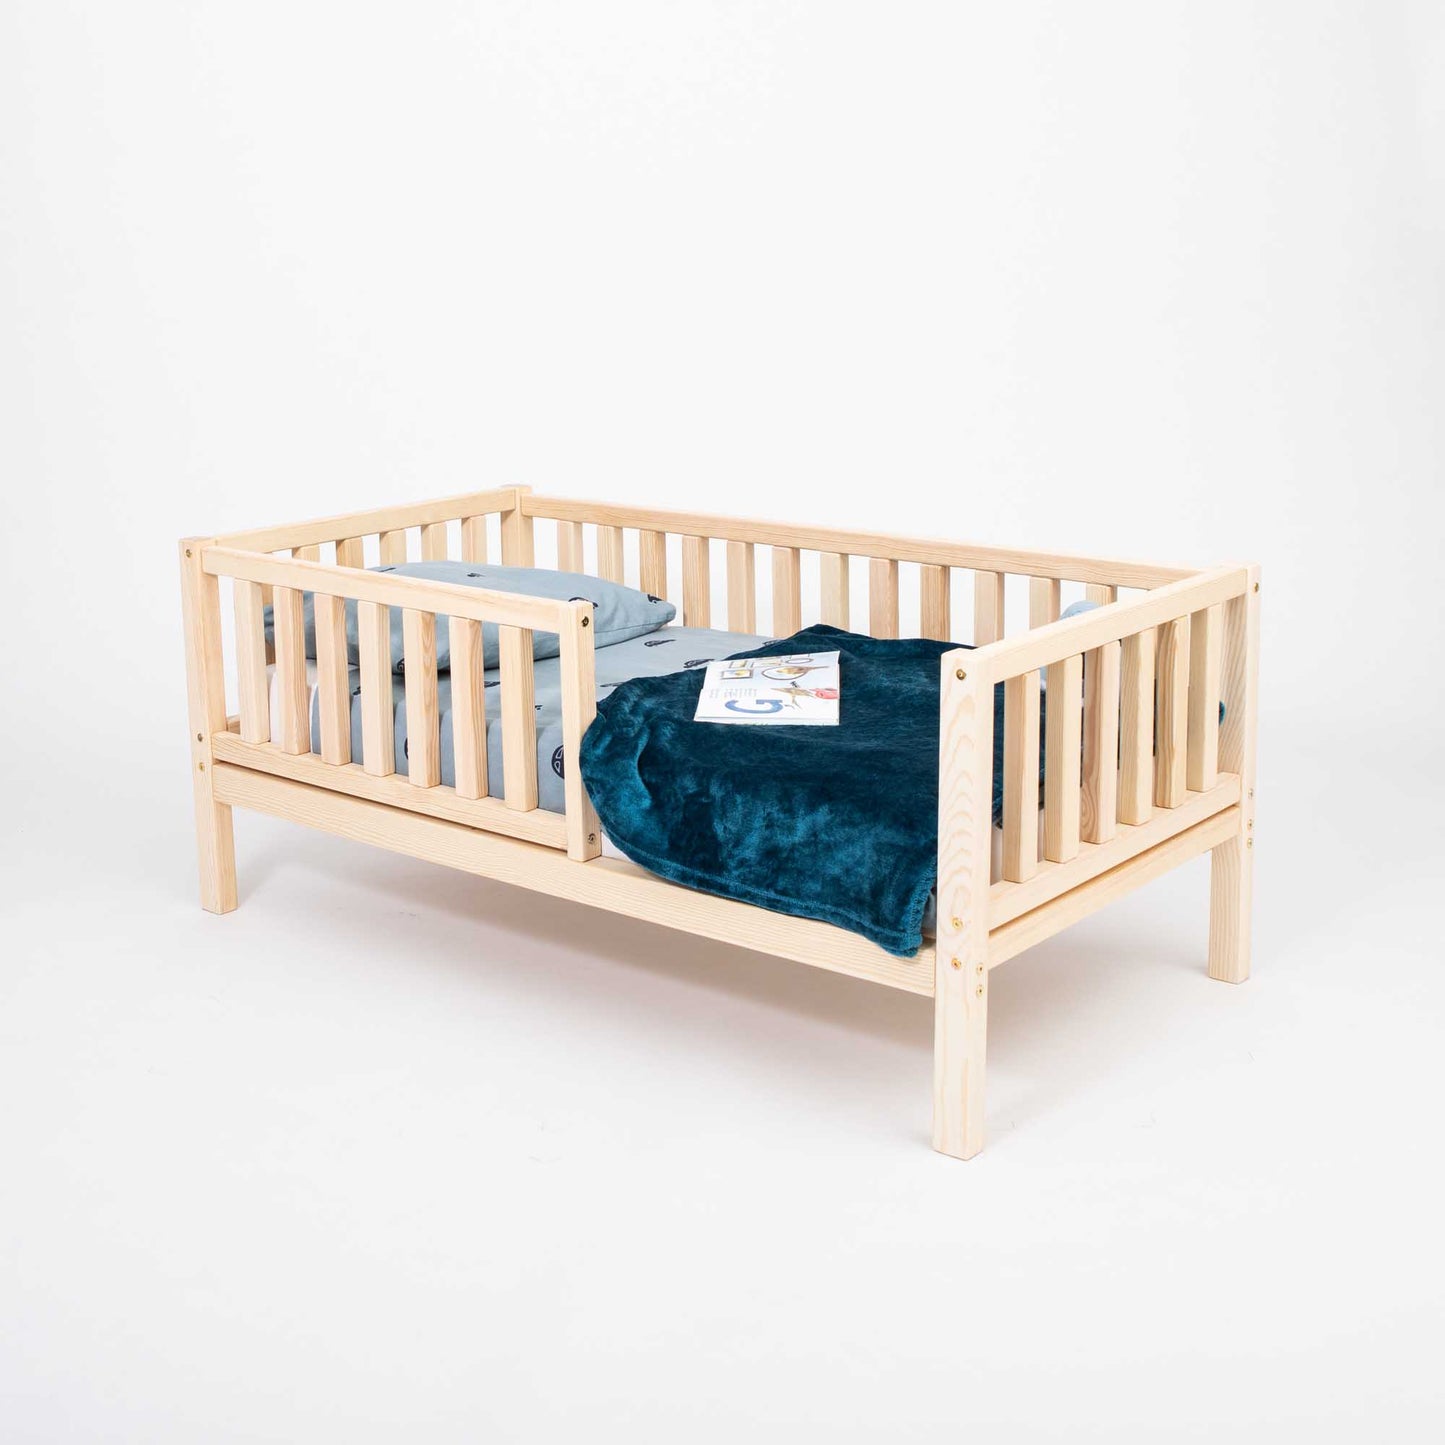 A Sweet Home From Wood toddler bed on legs with a fence, perfect for independent sleeping for children.